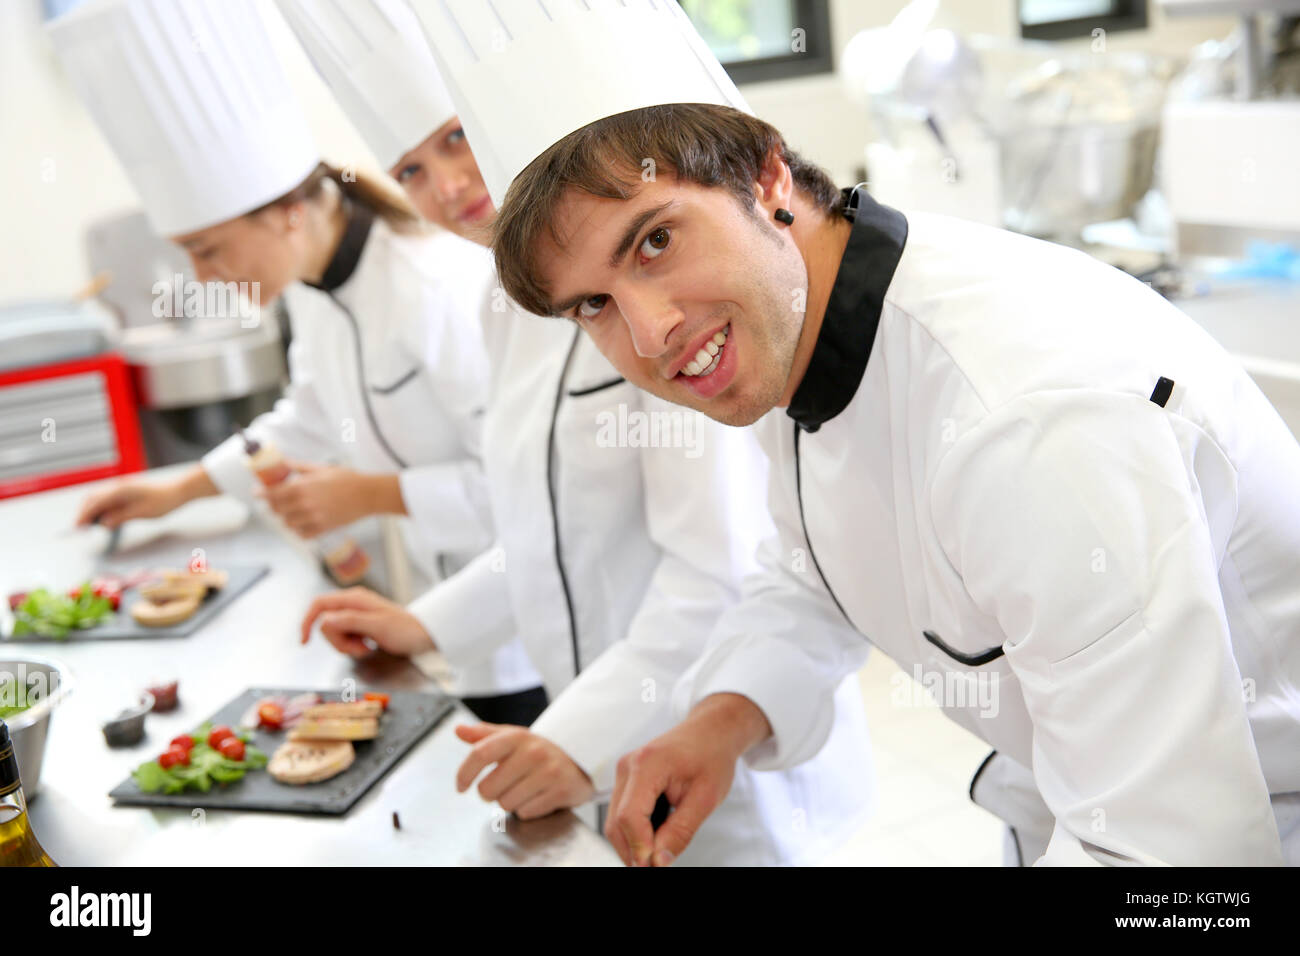 Smiling young man in restaurant kitchen Stock Photo